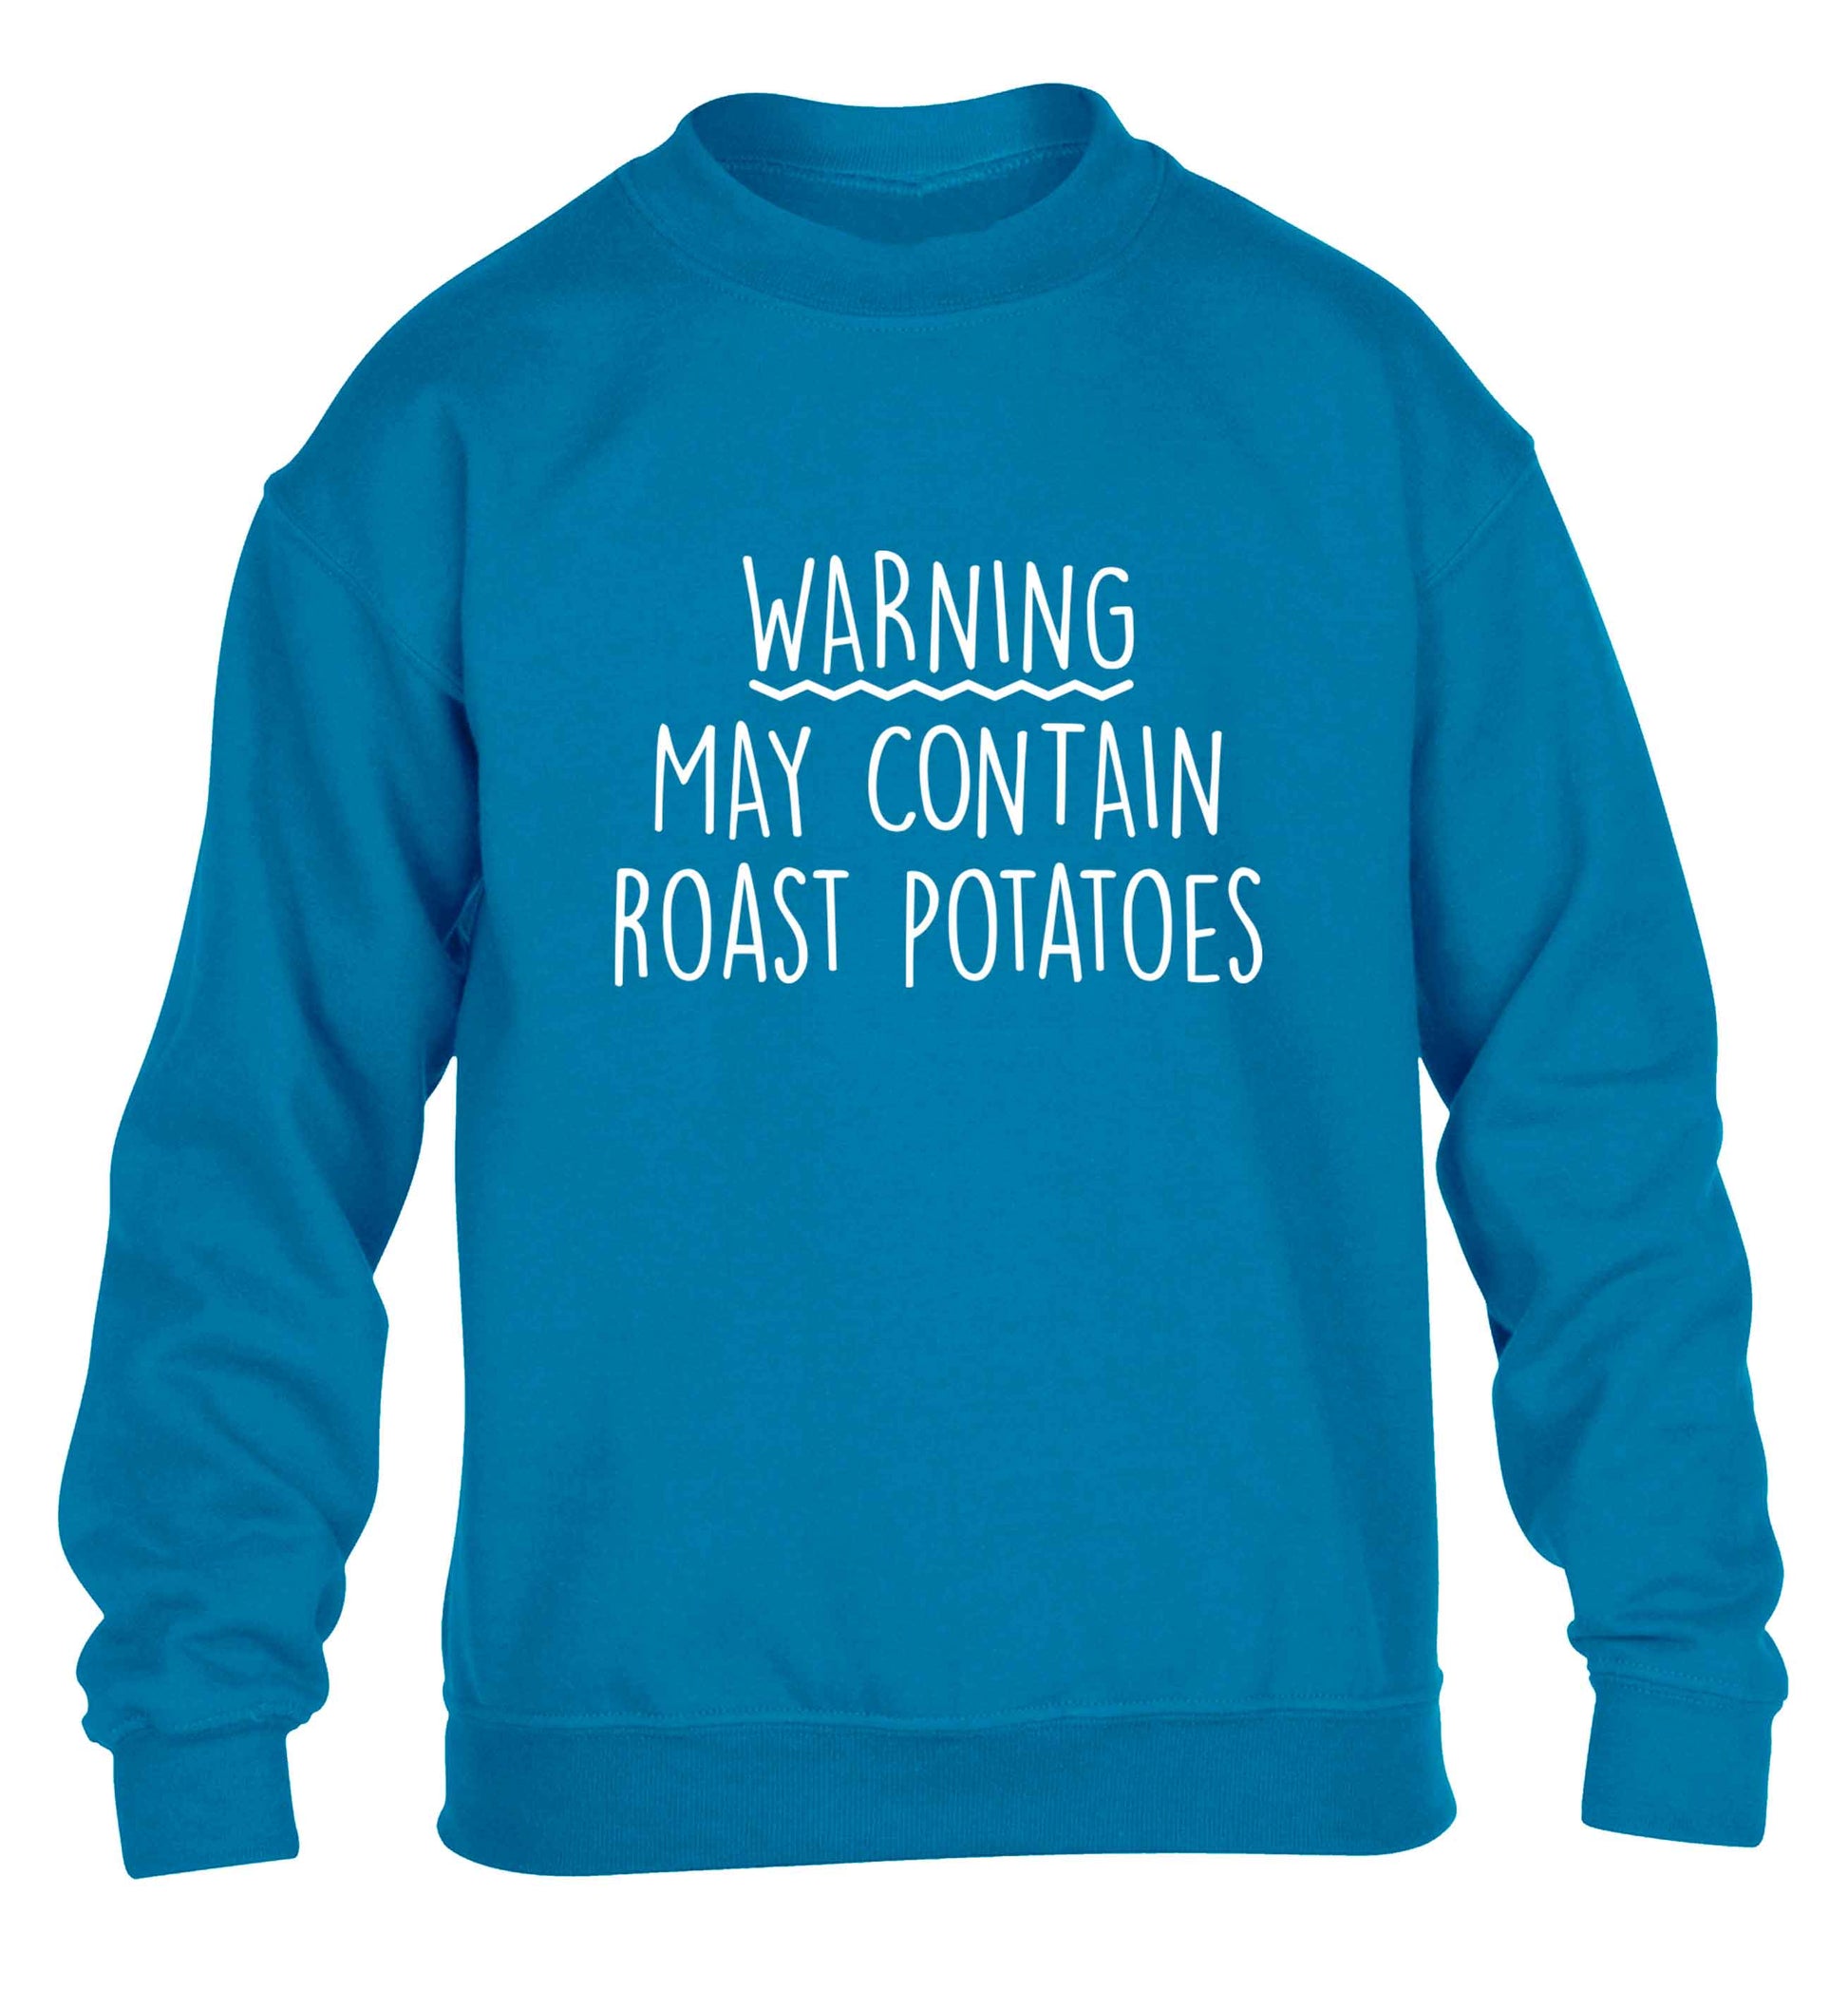 Warning may containg roast potatoes children's blue sweater 12-13 Years